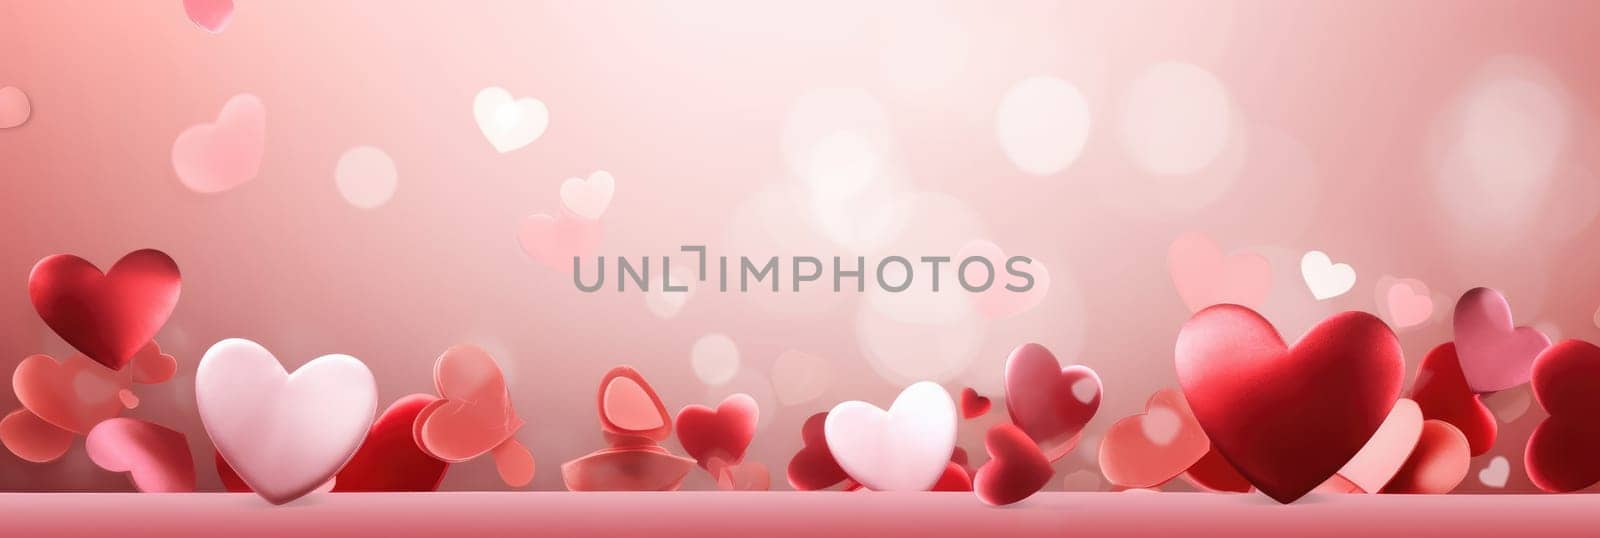 St. Valentines day, wedding banner with abstract illustrated red, pink flying hearts on pink bokeh background. Use for cute love sale banners, vouchers or greeting cards. Concept love, copy space. by Angelsmoon